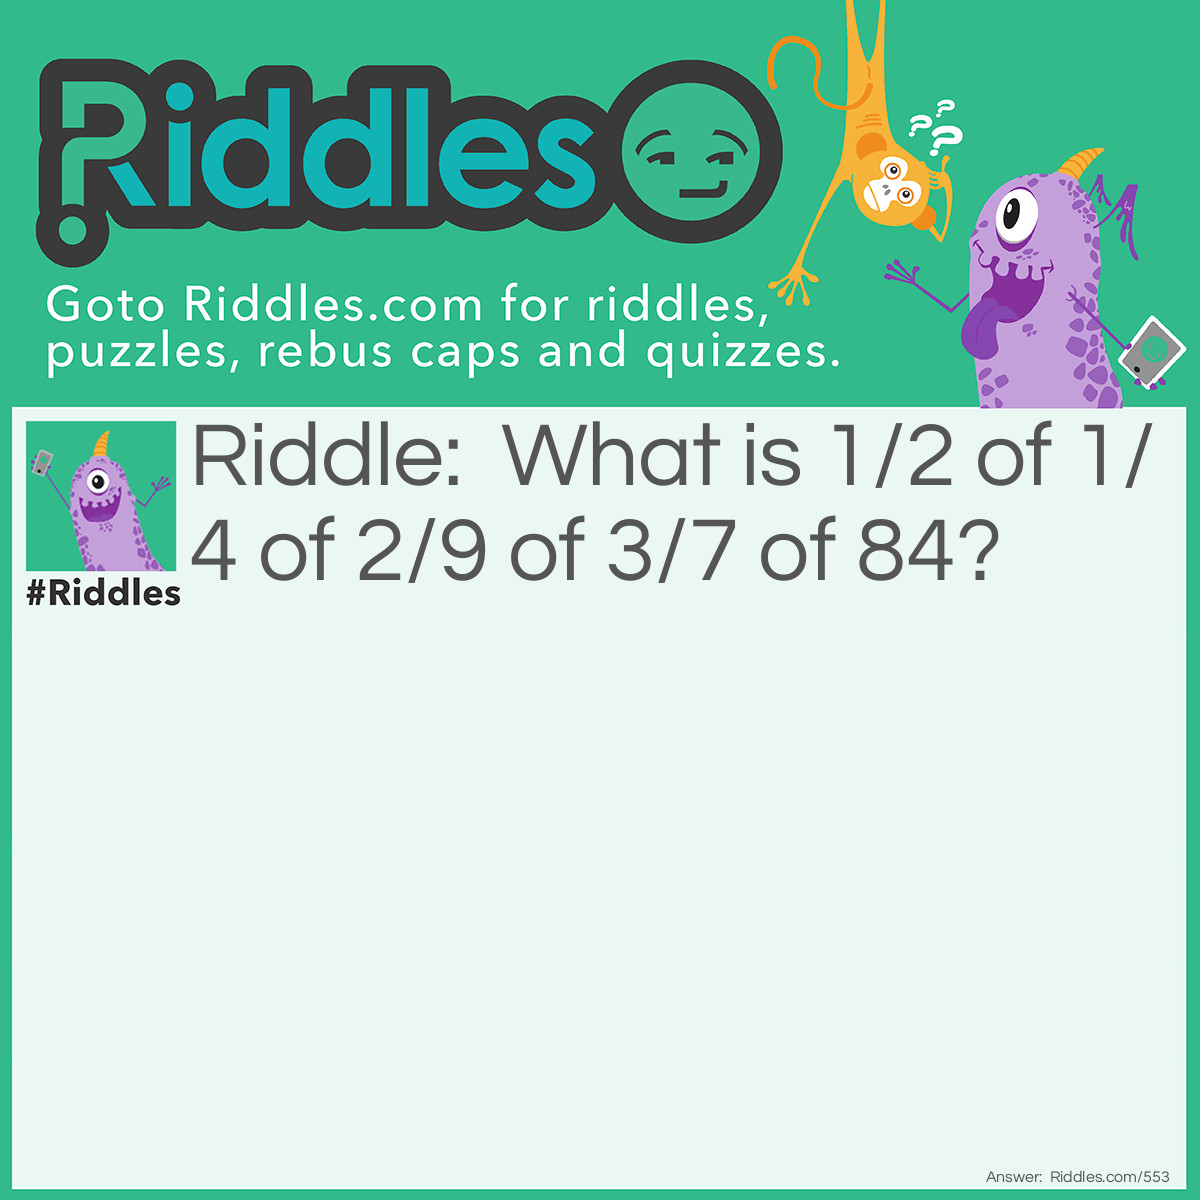 Riddle: What is 1/2 of 1/4 of 2/9 of 3/7 of 84? Answer: The answer is 1. 3/7 of 84 = 36 2/9 of 36 = 8 1/4 of 8 = 2 1/2 of 2 = 1